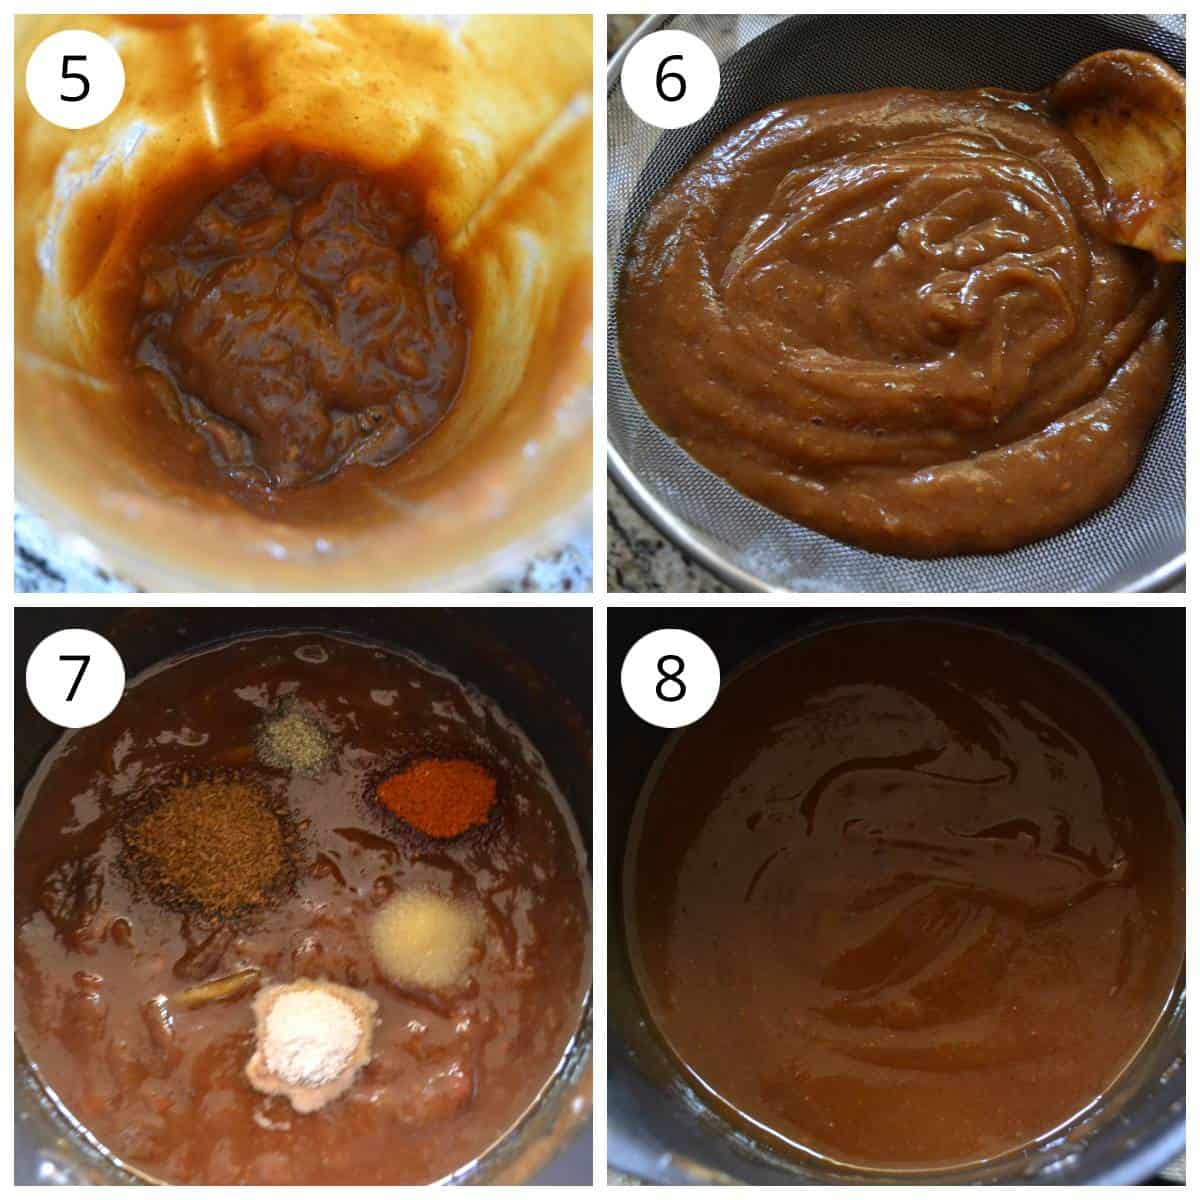 Steps to make tamarind chutney on stovetop by adding spices